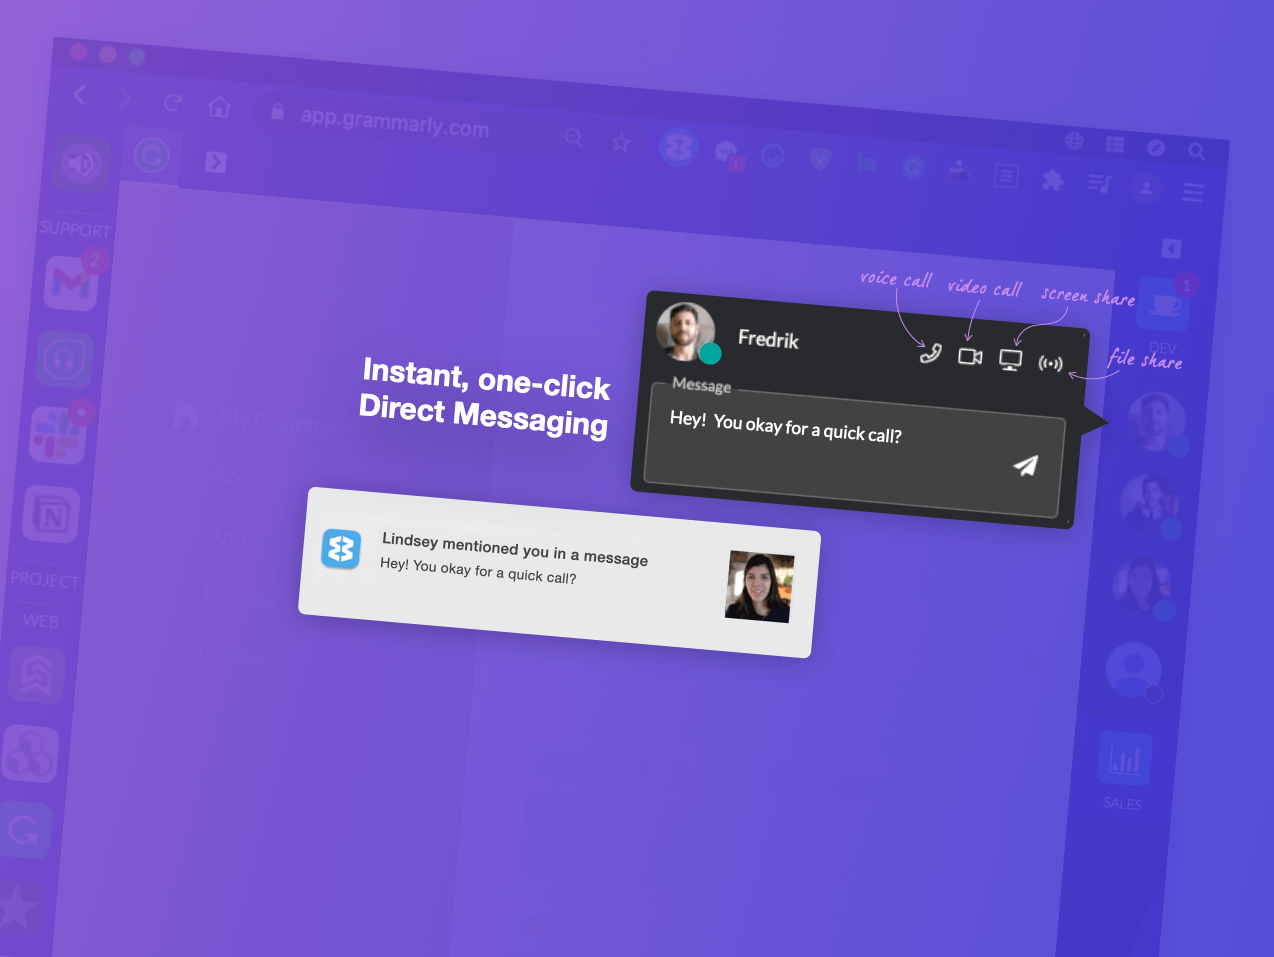 New! Send an instant DM straight from the browser.